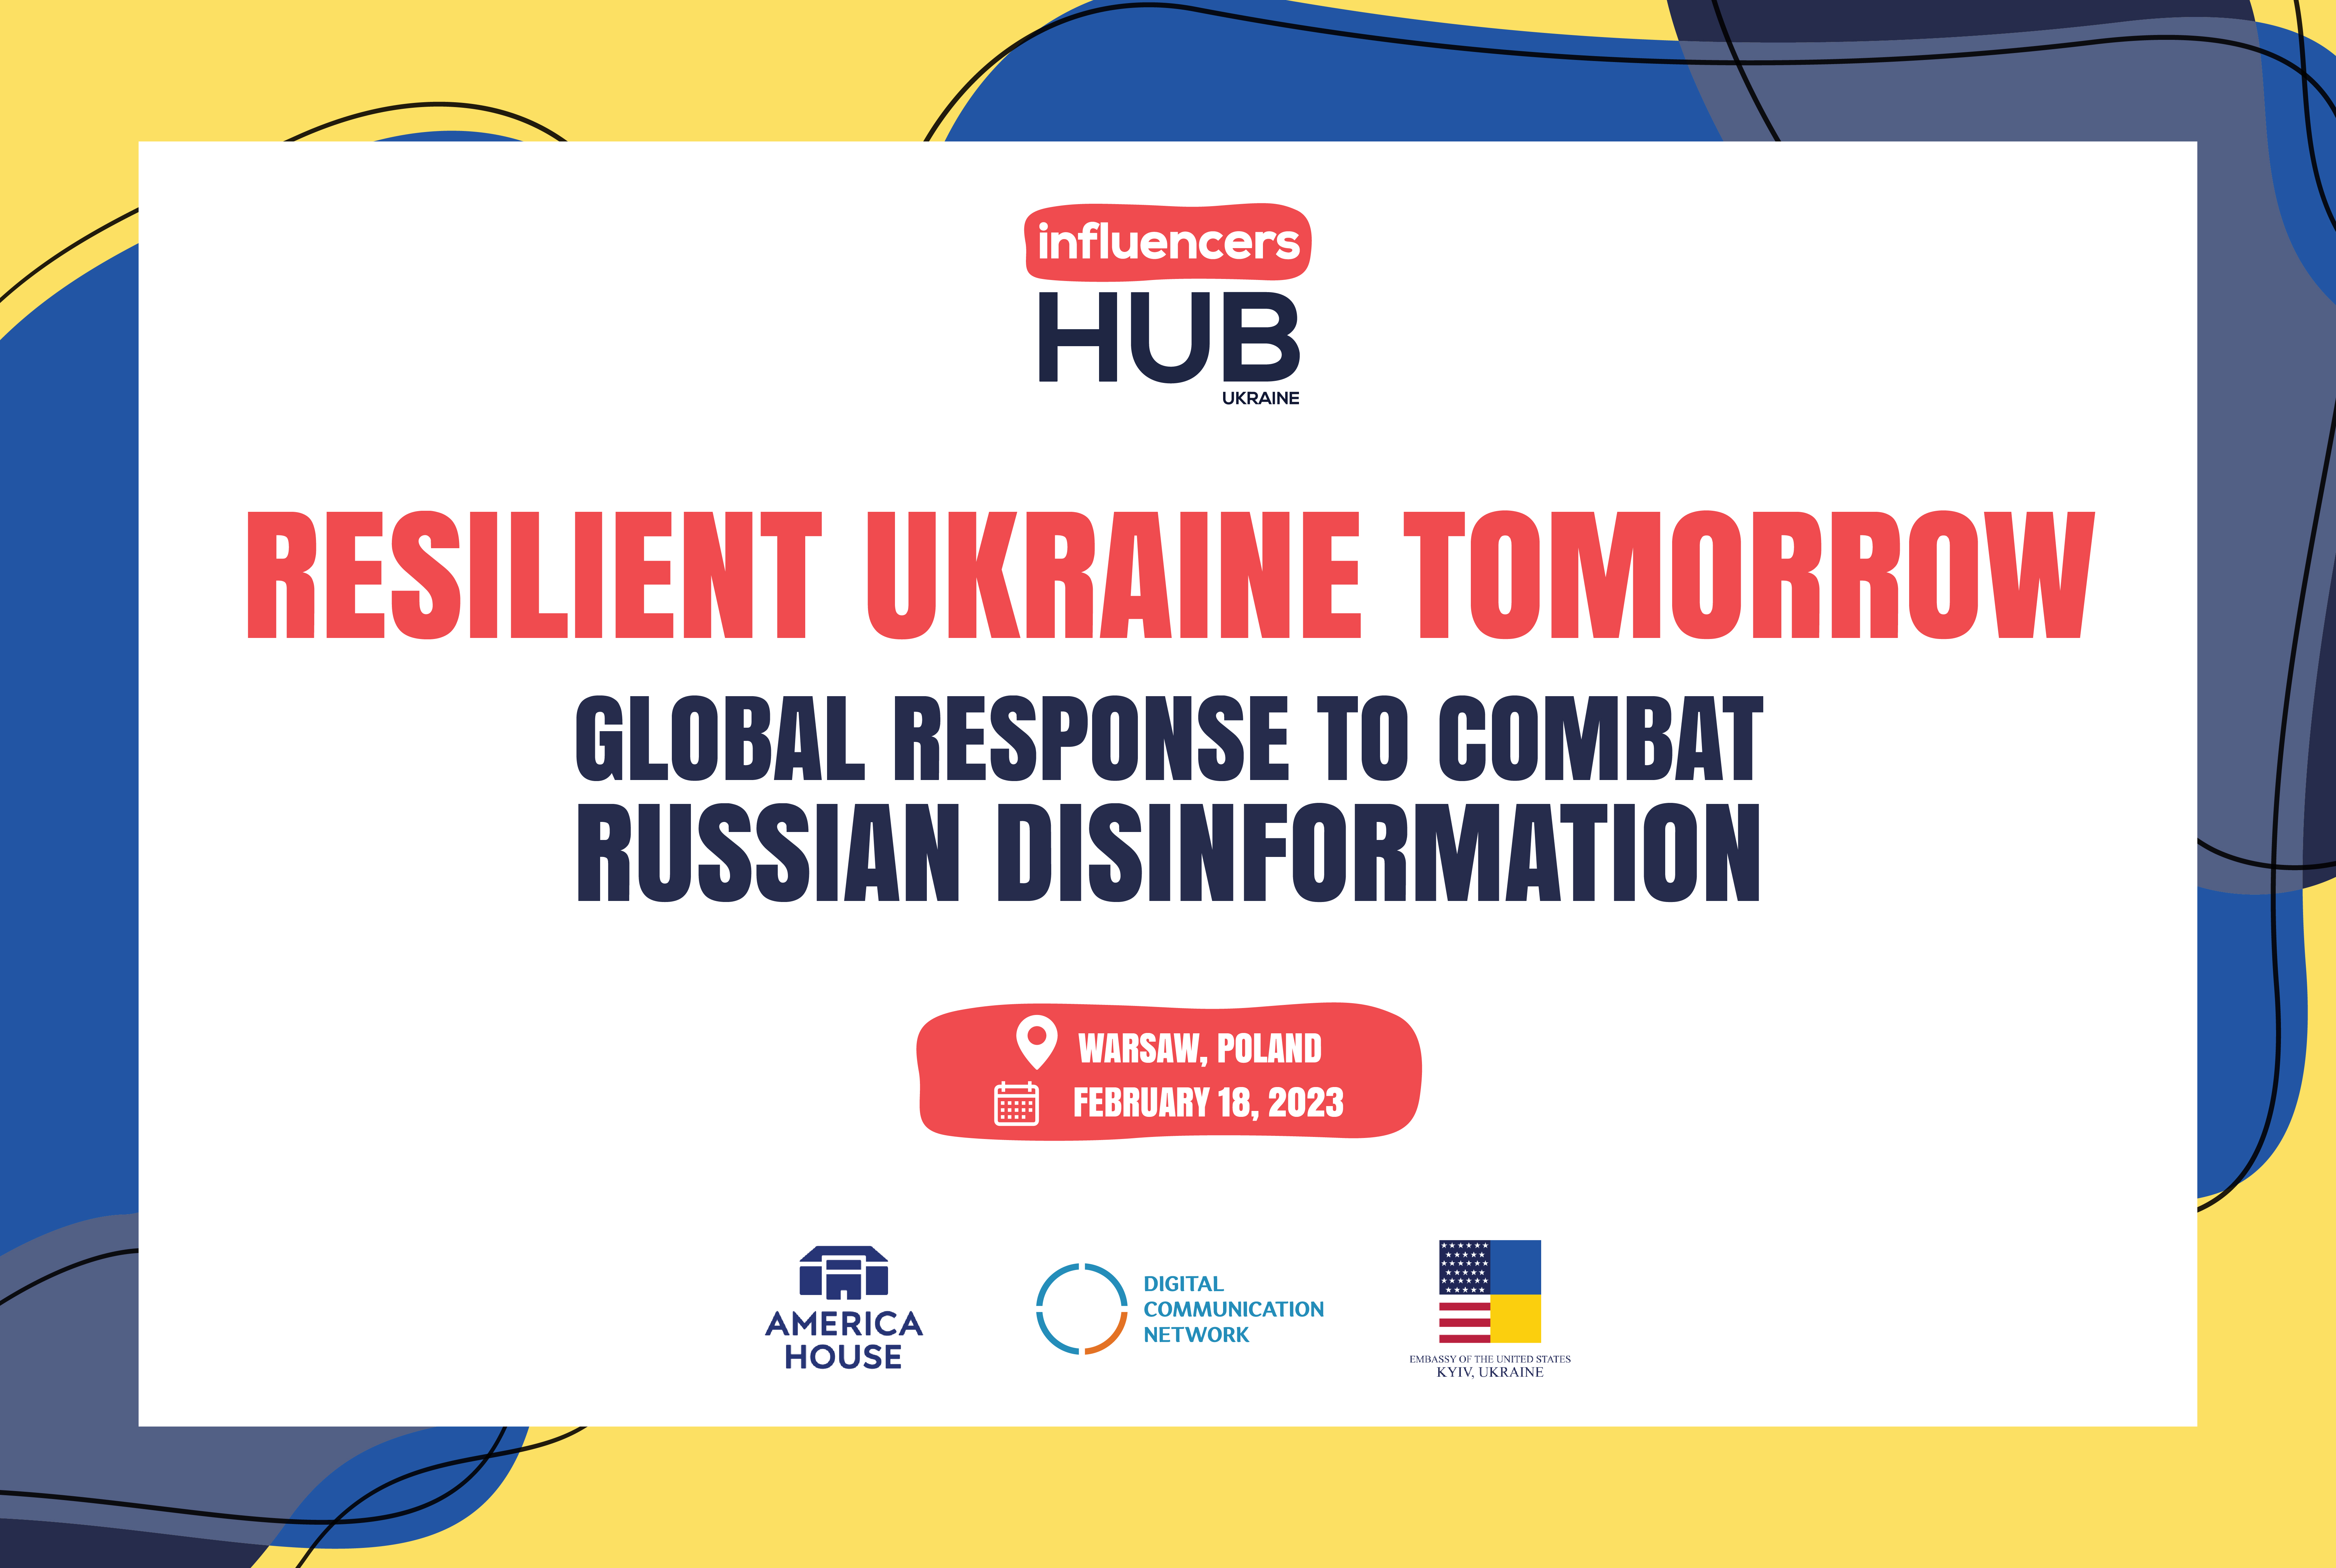 "Resilient Ukraine Tomorrow: Global Response to Combat Russian Disinformation" Conference